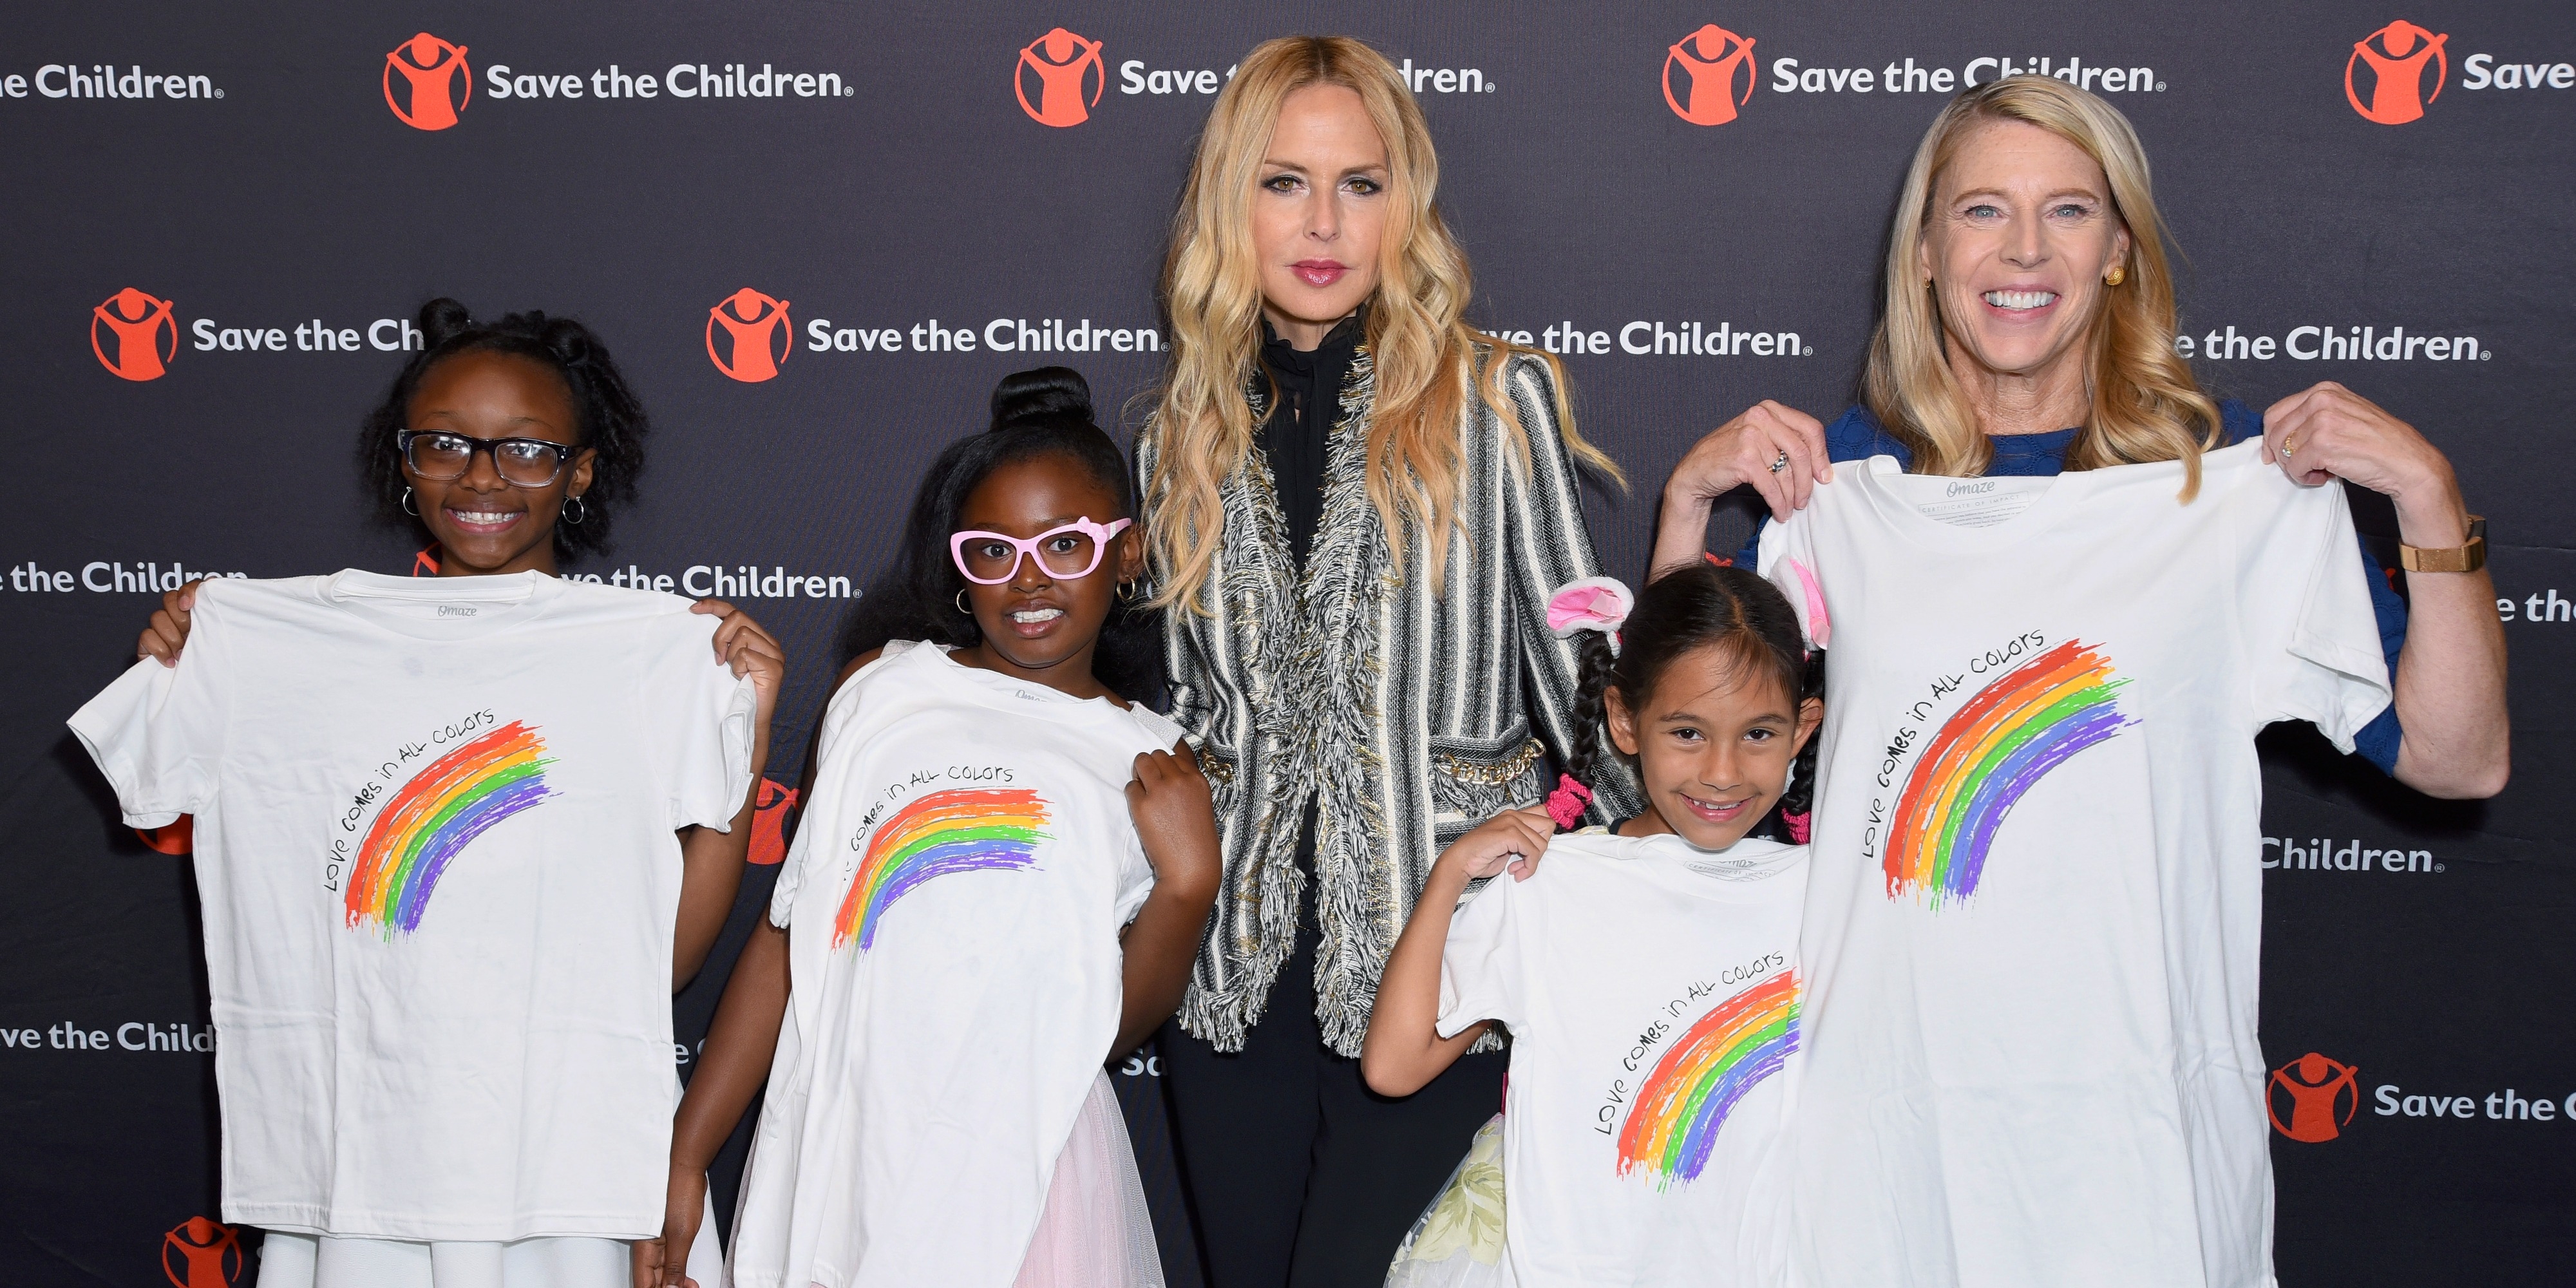 Artist Ambassador Rachael Zoe poses for a photograph with Save the Children President Carolyn Miles and children at the Illumination Gala. Photo credit: Save the Children, 2018.